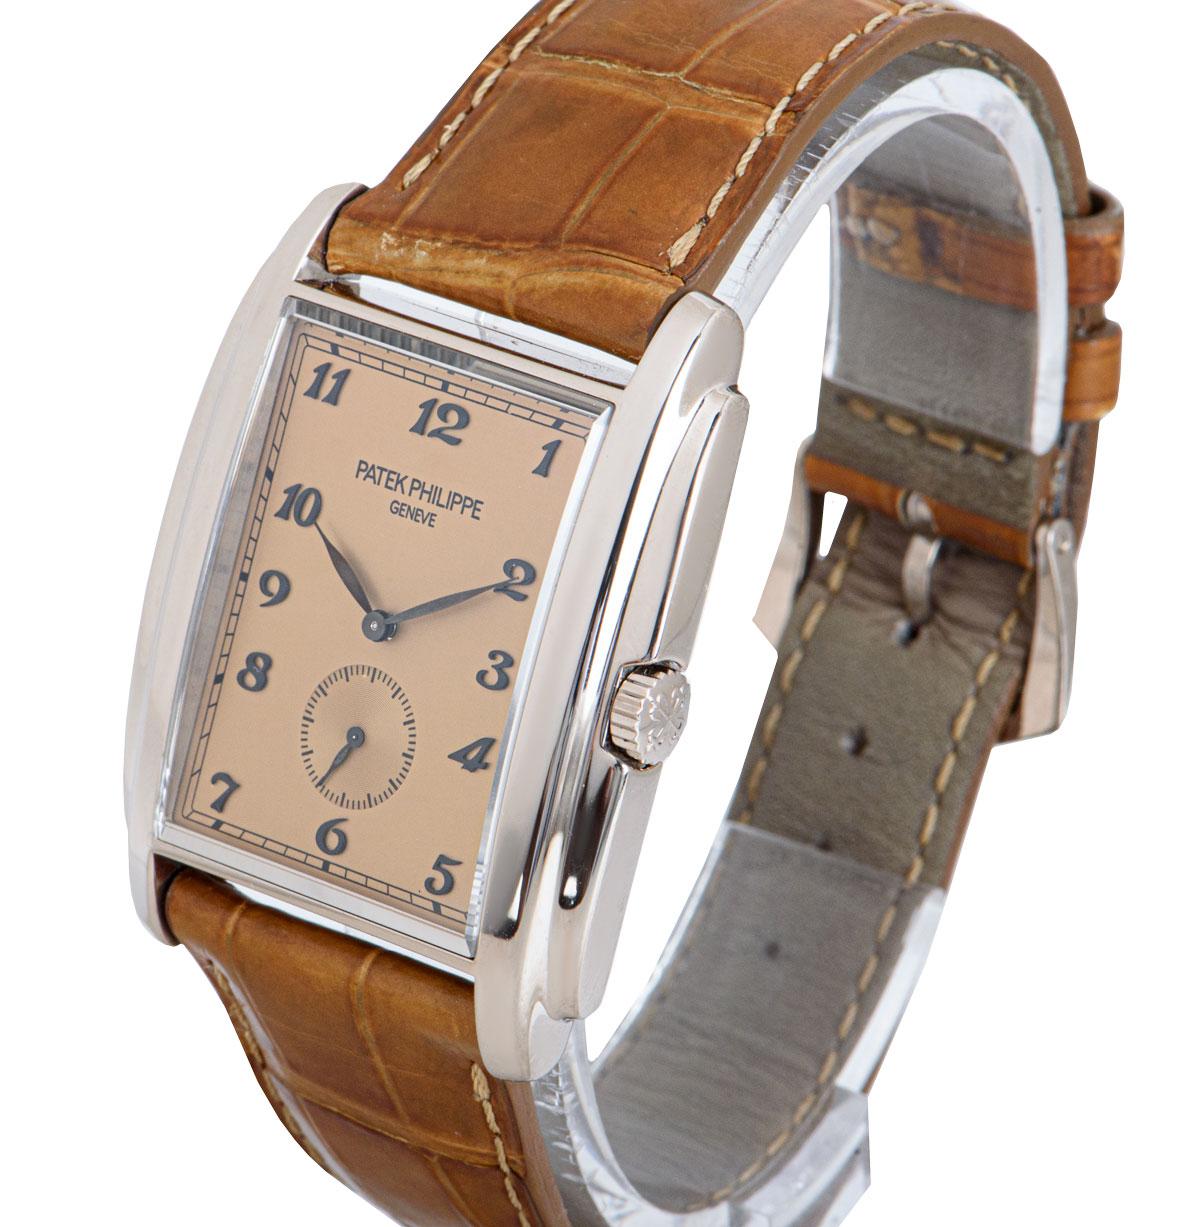 A 33.4 mm 18k White Gold Gondolo Gents Wristwatch, rose dial with applied Breguet numerals, small seconds at 6 0'clock, a fixed 18k white gold bezel, an original brown leather strap with an original 18k white gold pin buckle, sapphire glass,